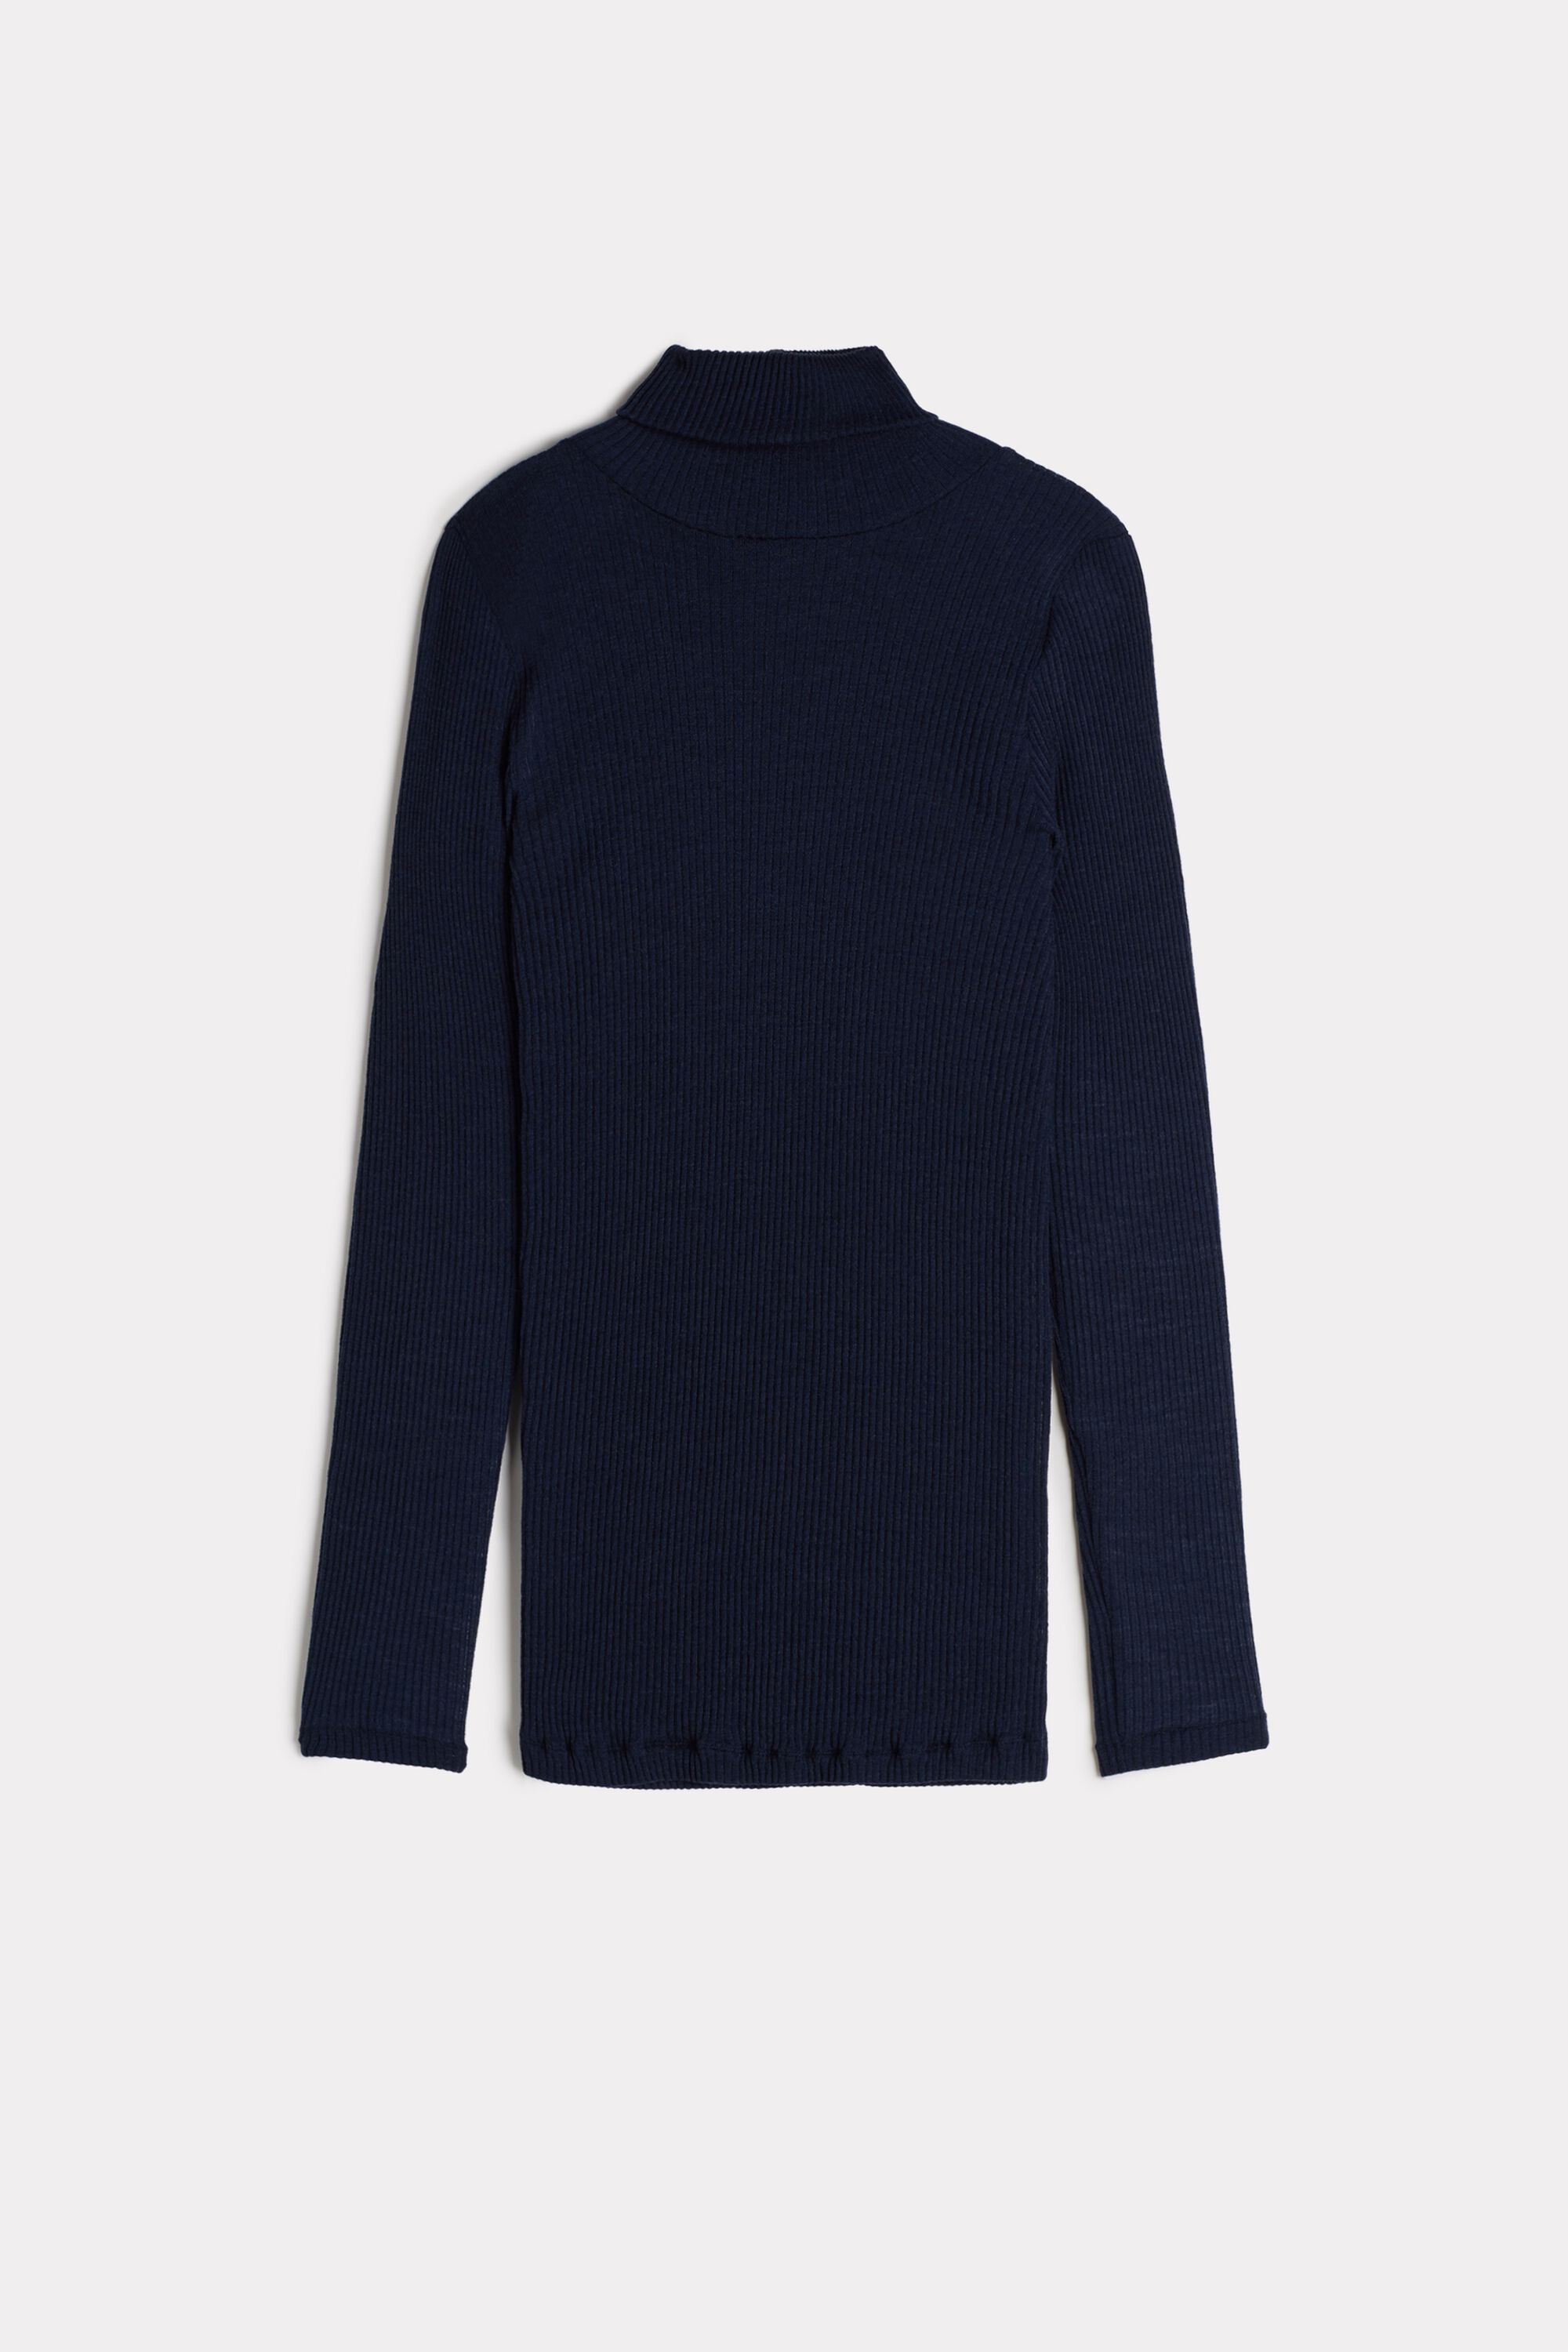 Long-sleeve High-Neck Tubular Top in Wool and Silk | Intimissimi (US)